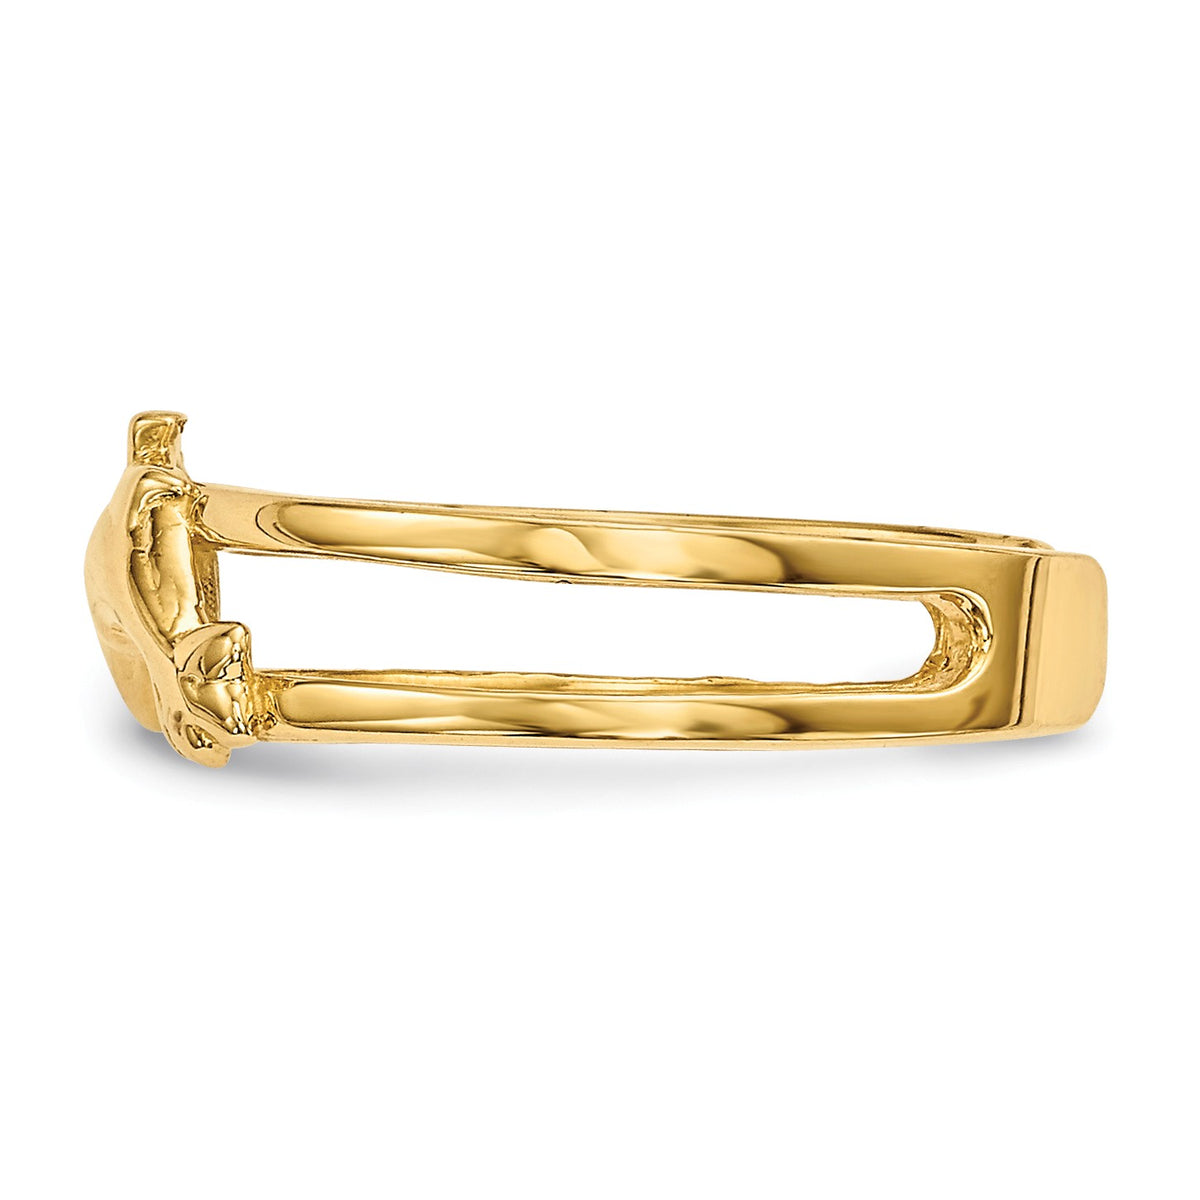 Alternate view of the 14k Yellow Gold 5.5mm Polished Double Dolphin Toe Ring by The Black Bow Jewelry Co.